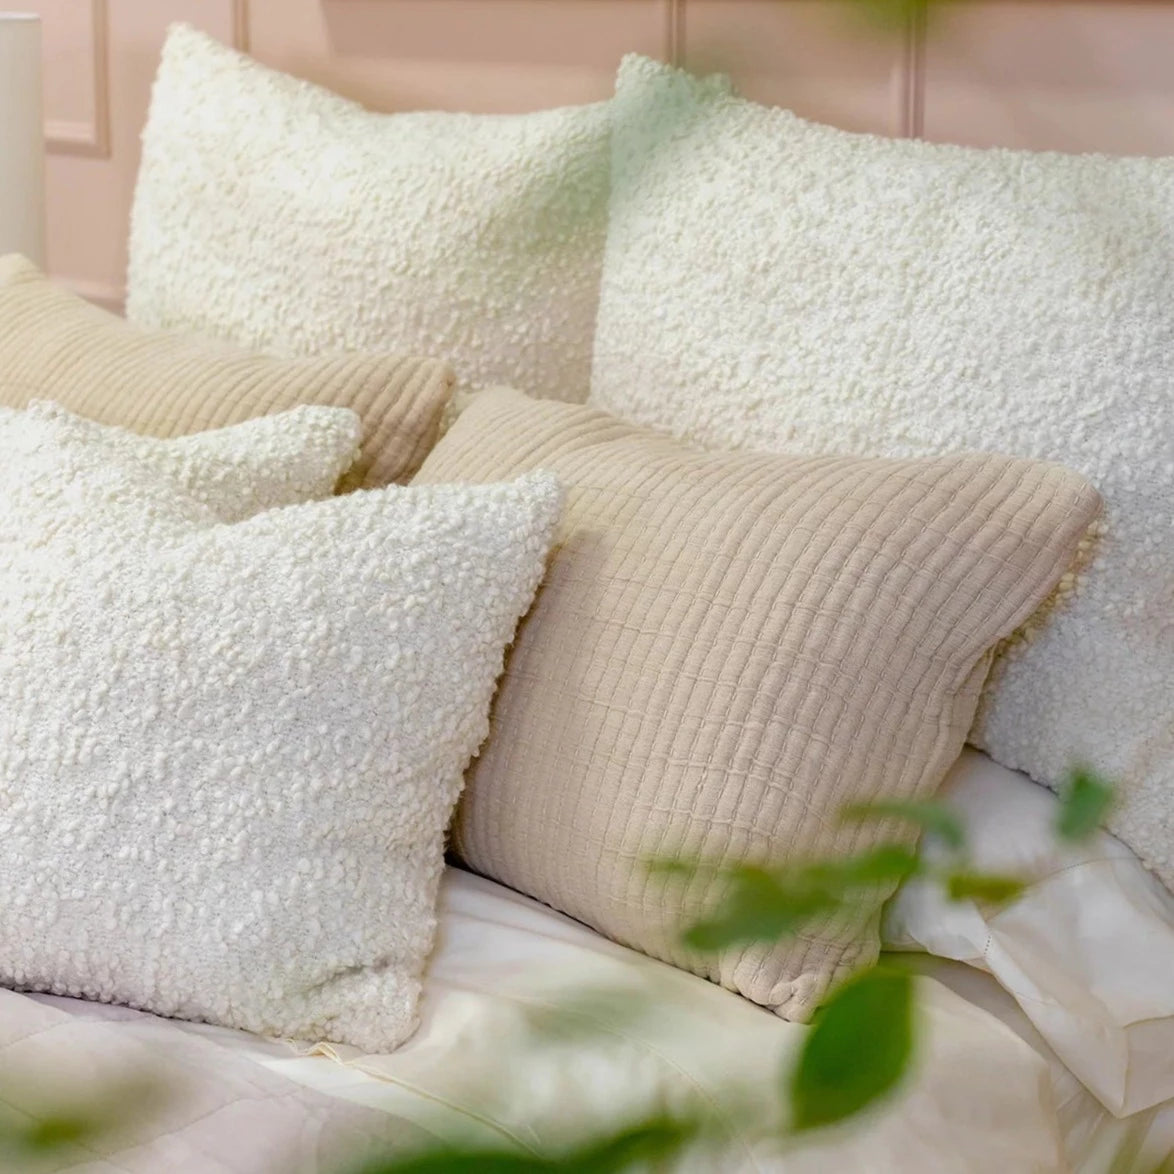 Murphy Ivory Big Pillow by Pom Pom at Home